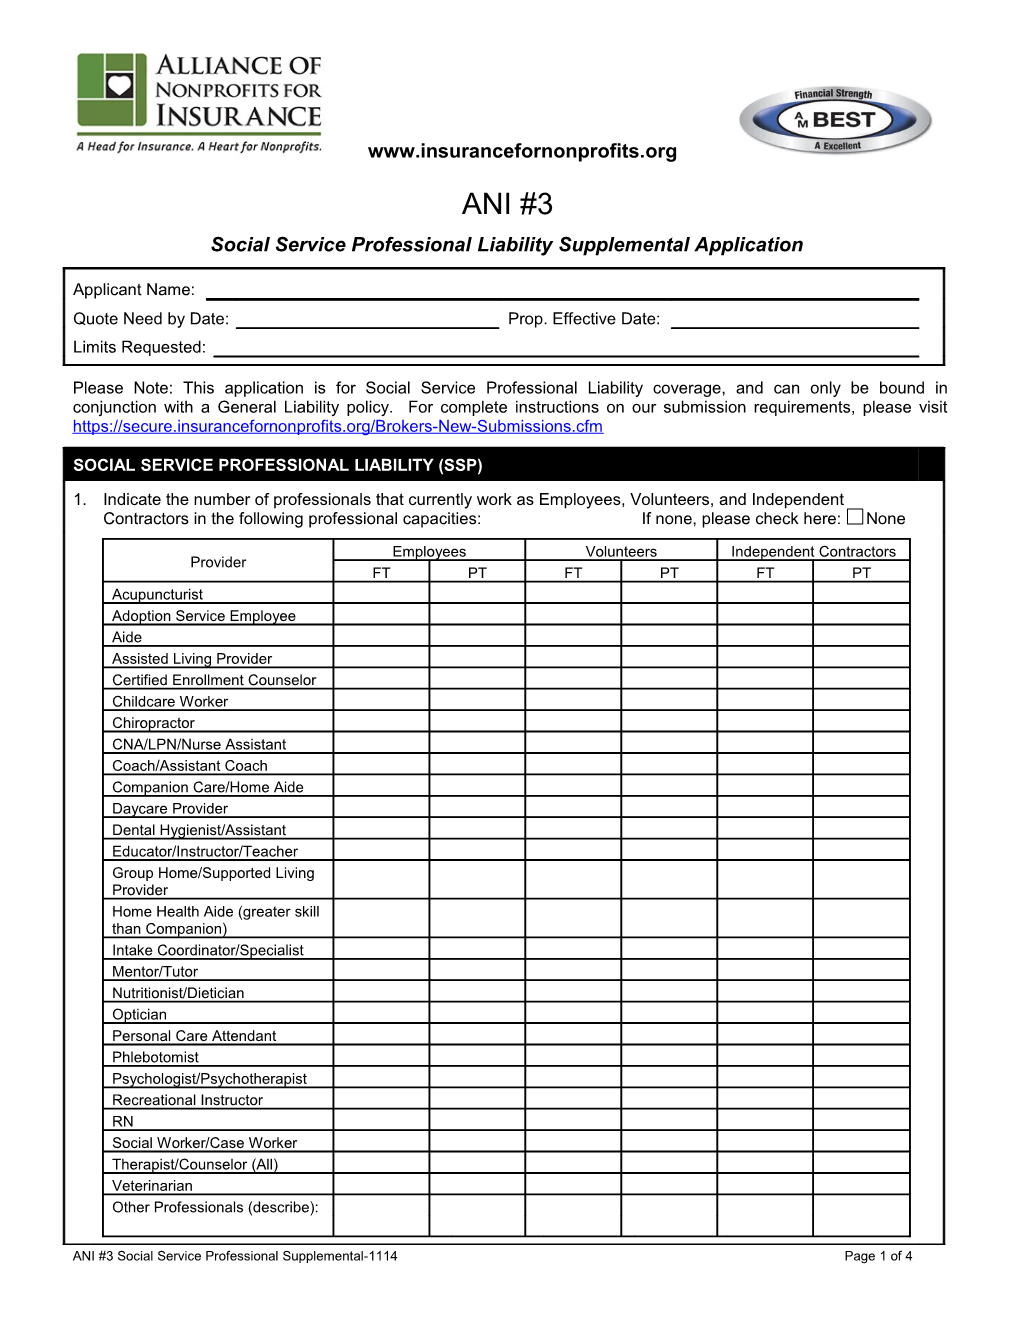 ANI #3Social Service Professional Supplemental-1114Page 1 of 3